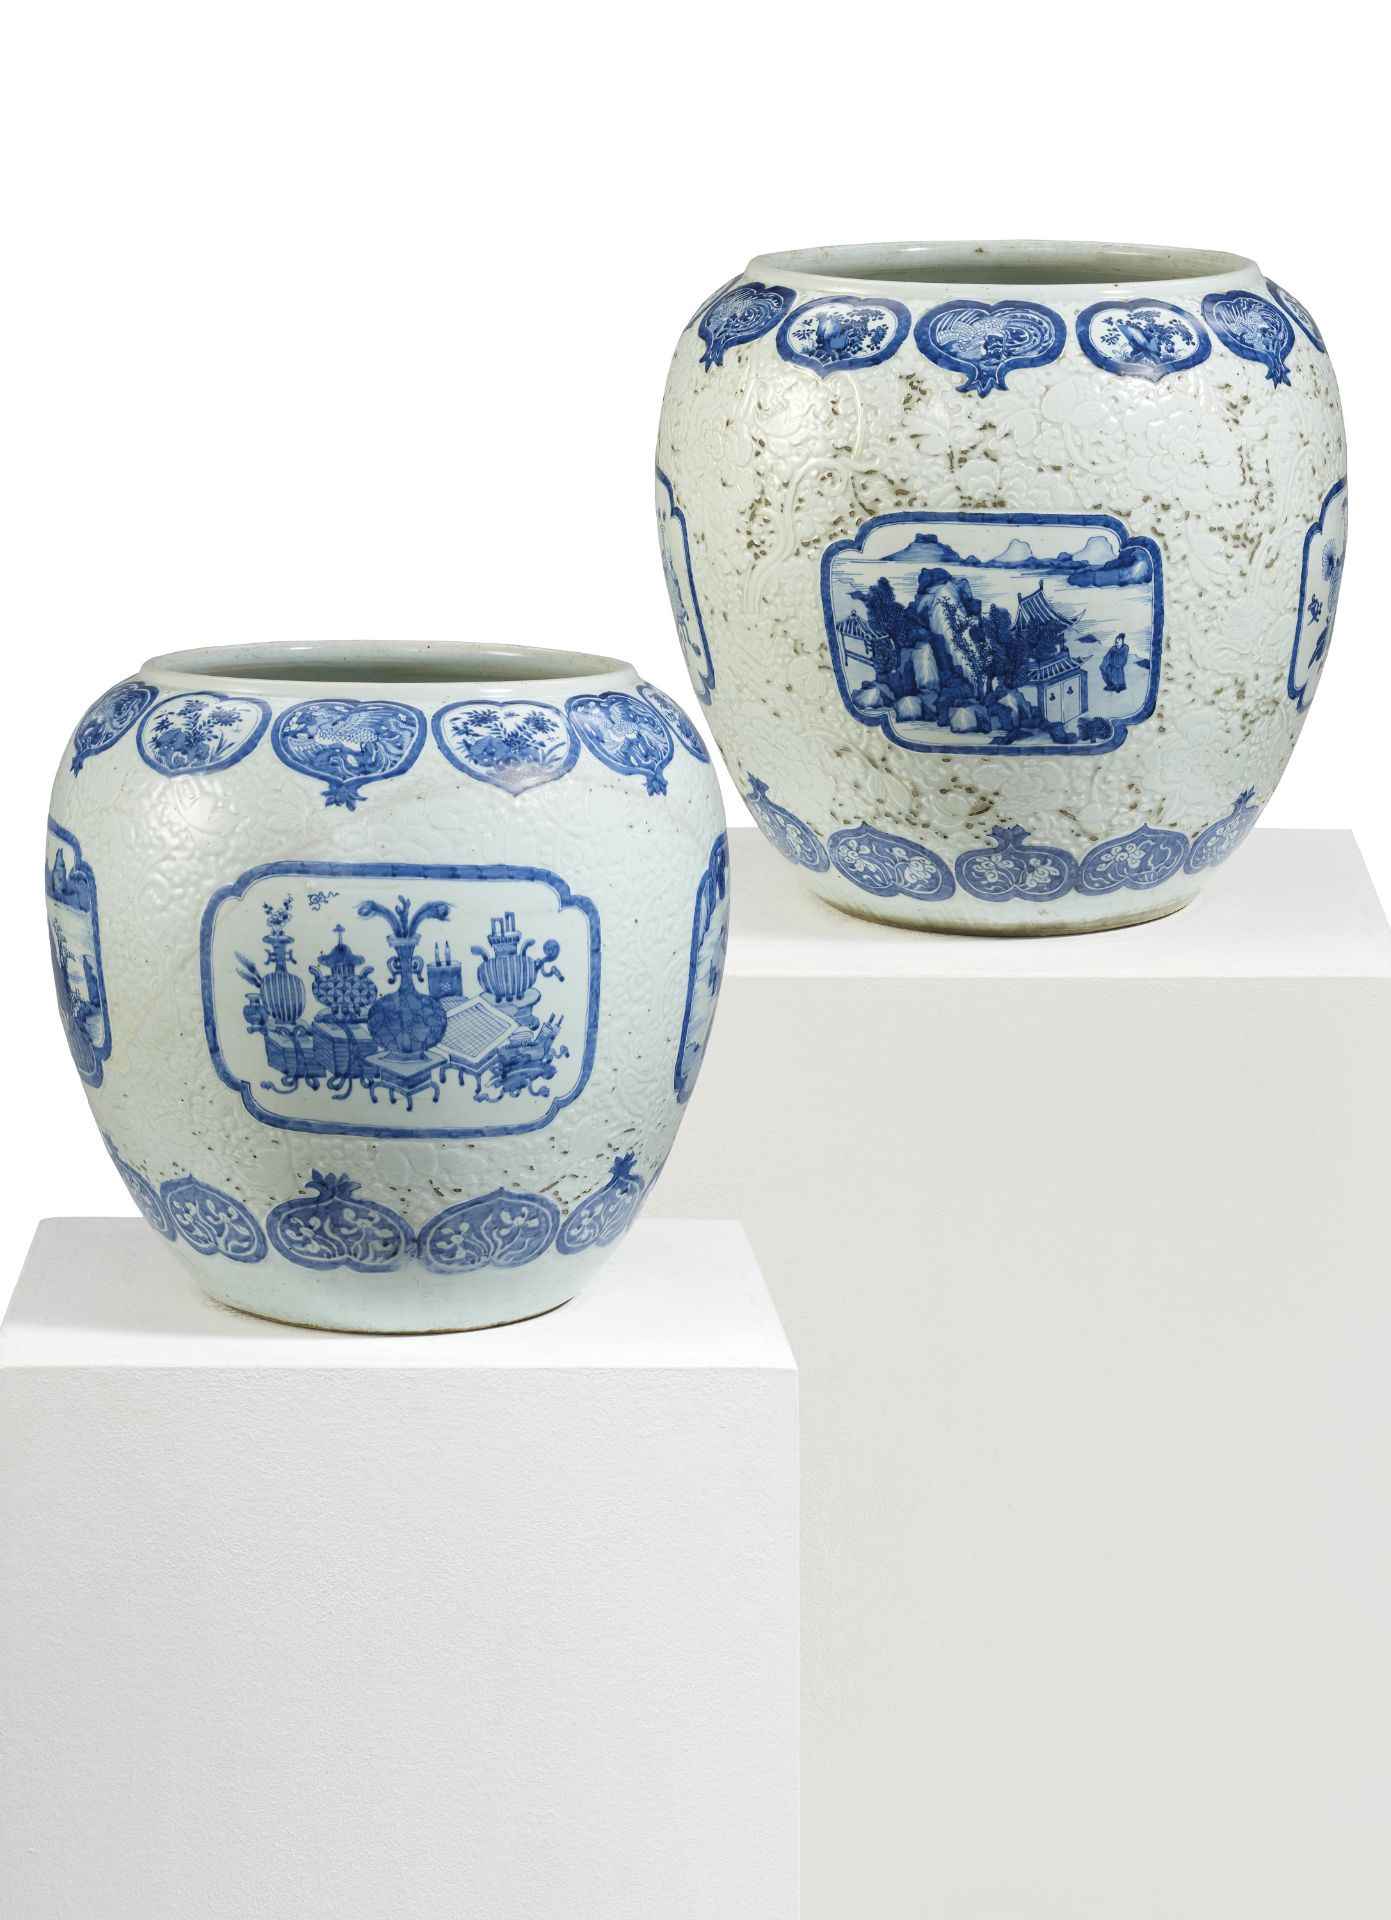 PAIR OF IMPORTANT PORCELAIN JARDINIÉRES WITH CUT PEONY DECORATION